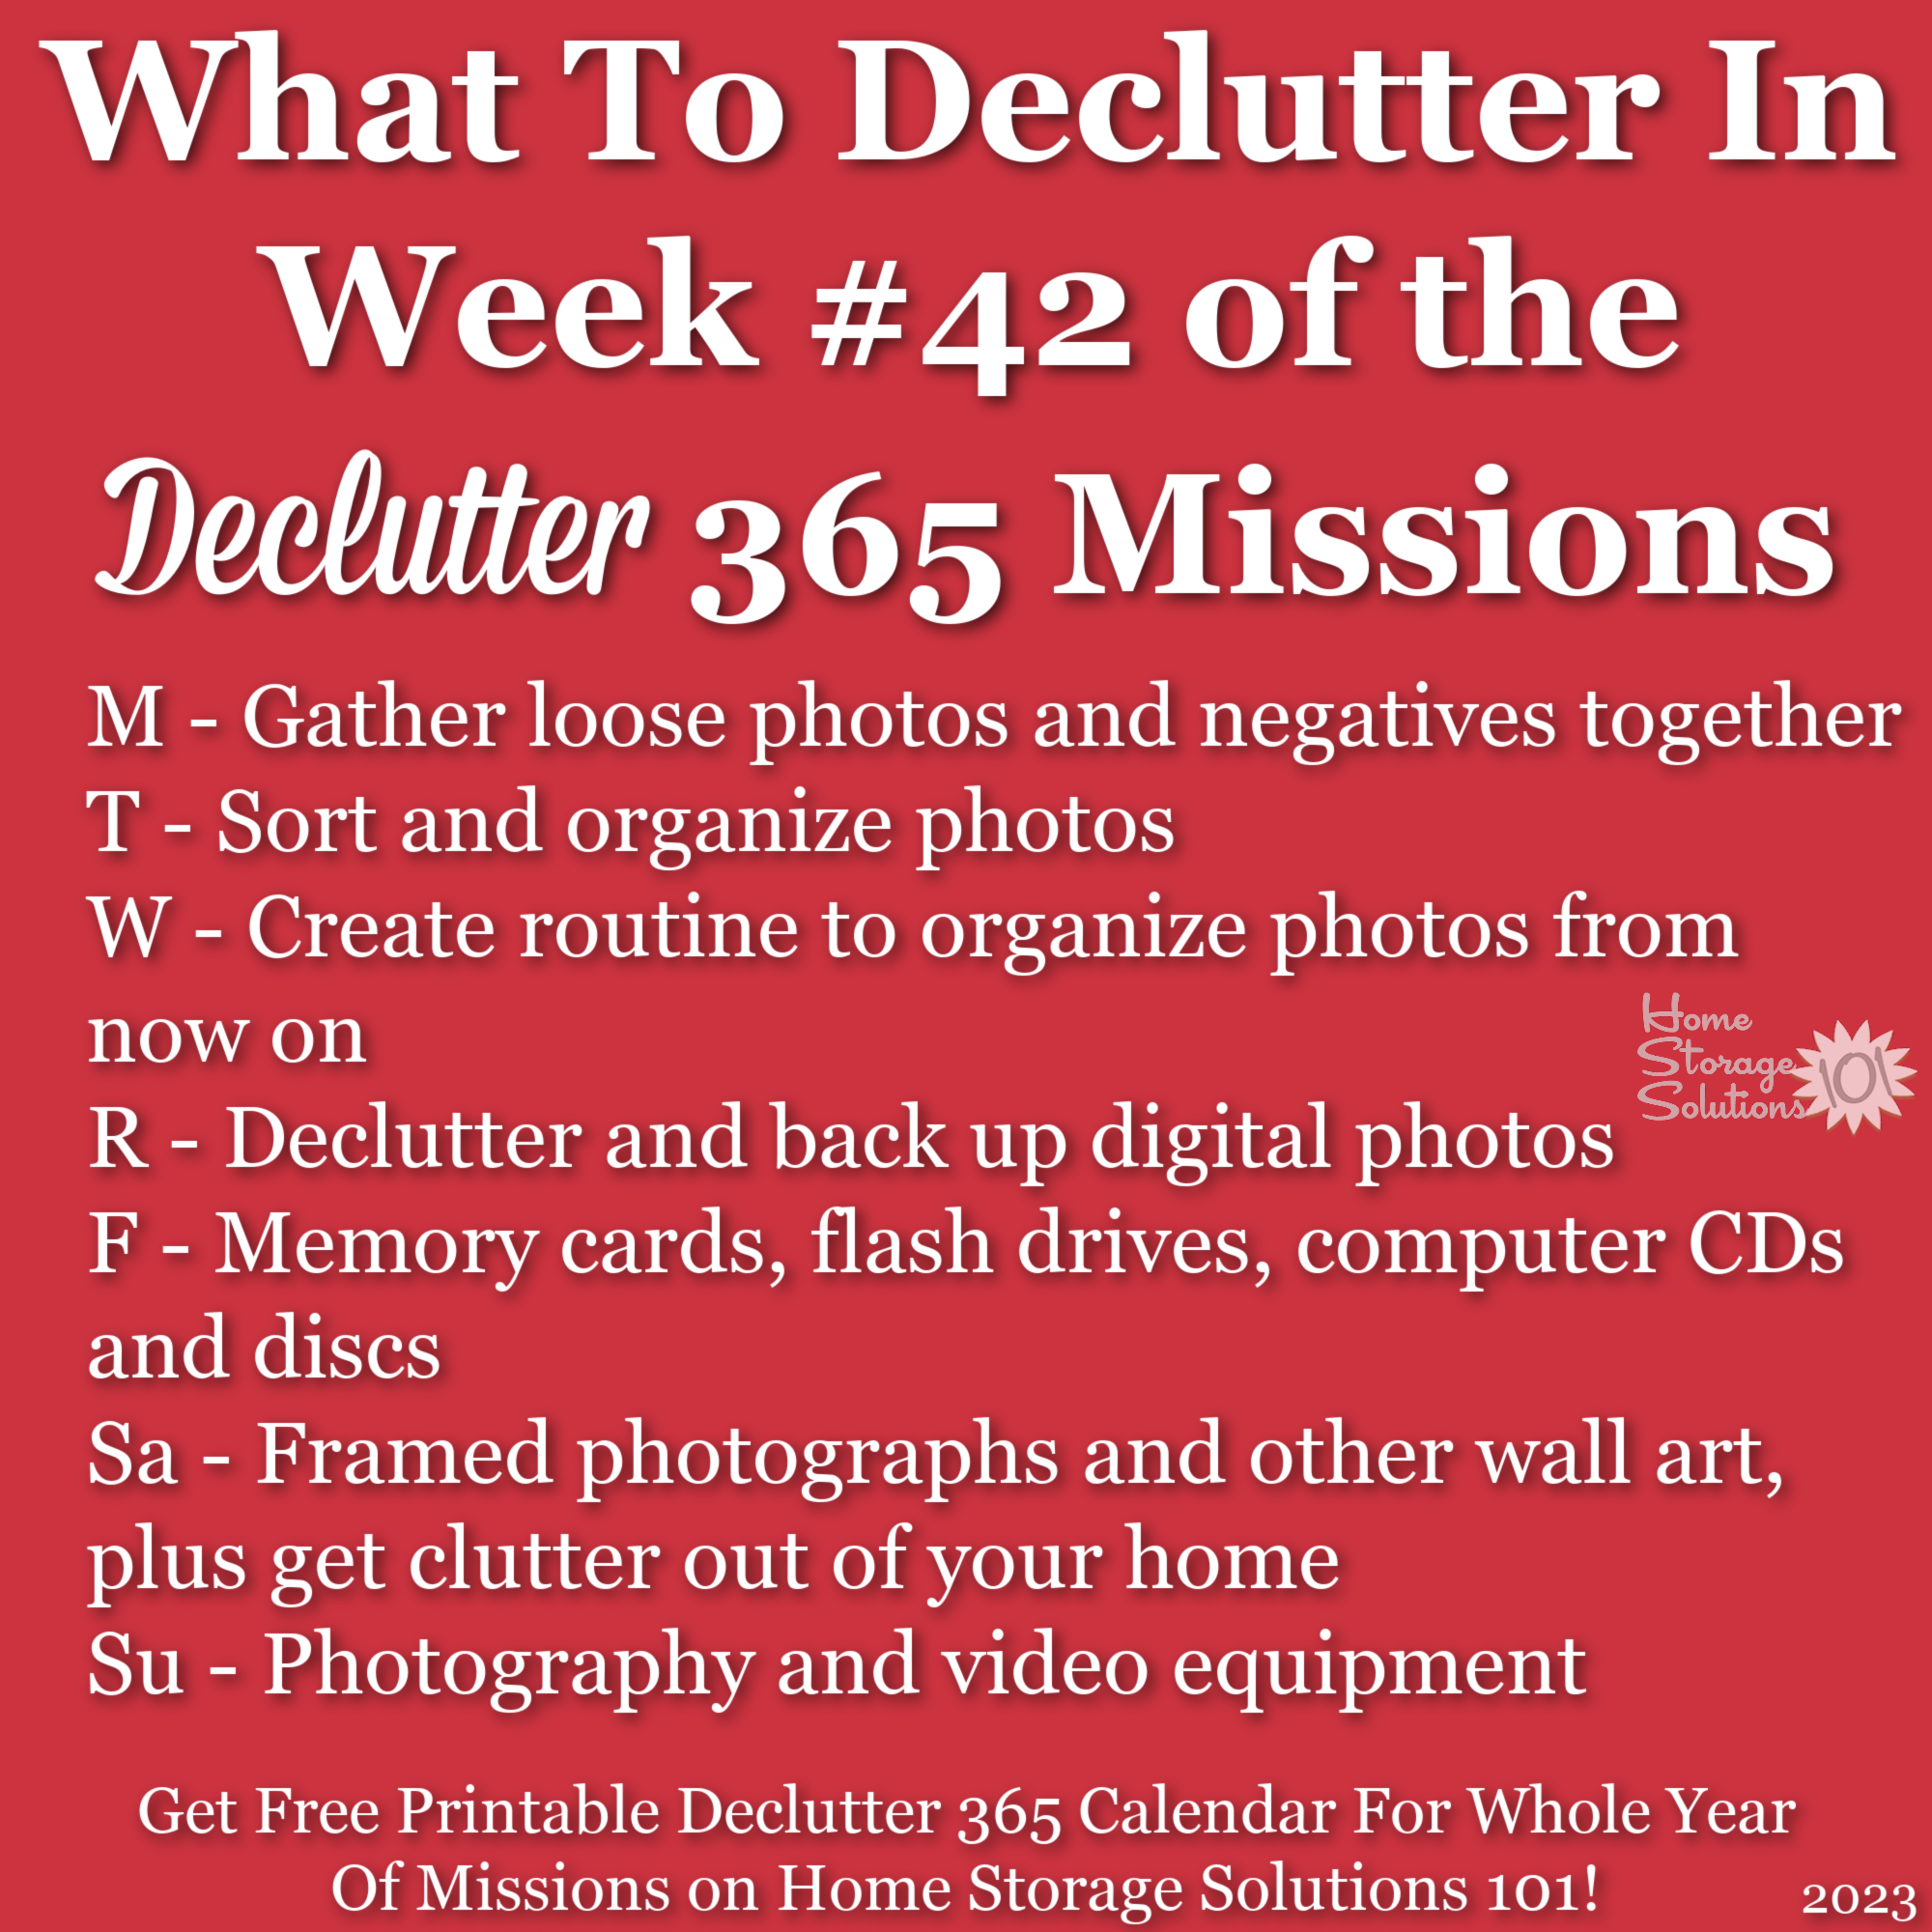 What to declutter in week #42 of the Declutter 365 missions {get a free printable Declutter 365 calendar for a whole year of missions on Home Storage Solutions 101!}